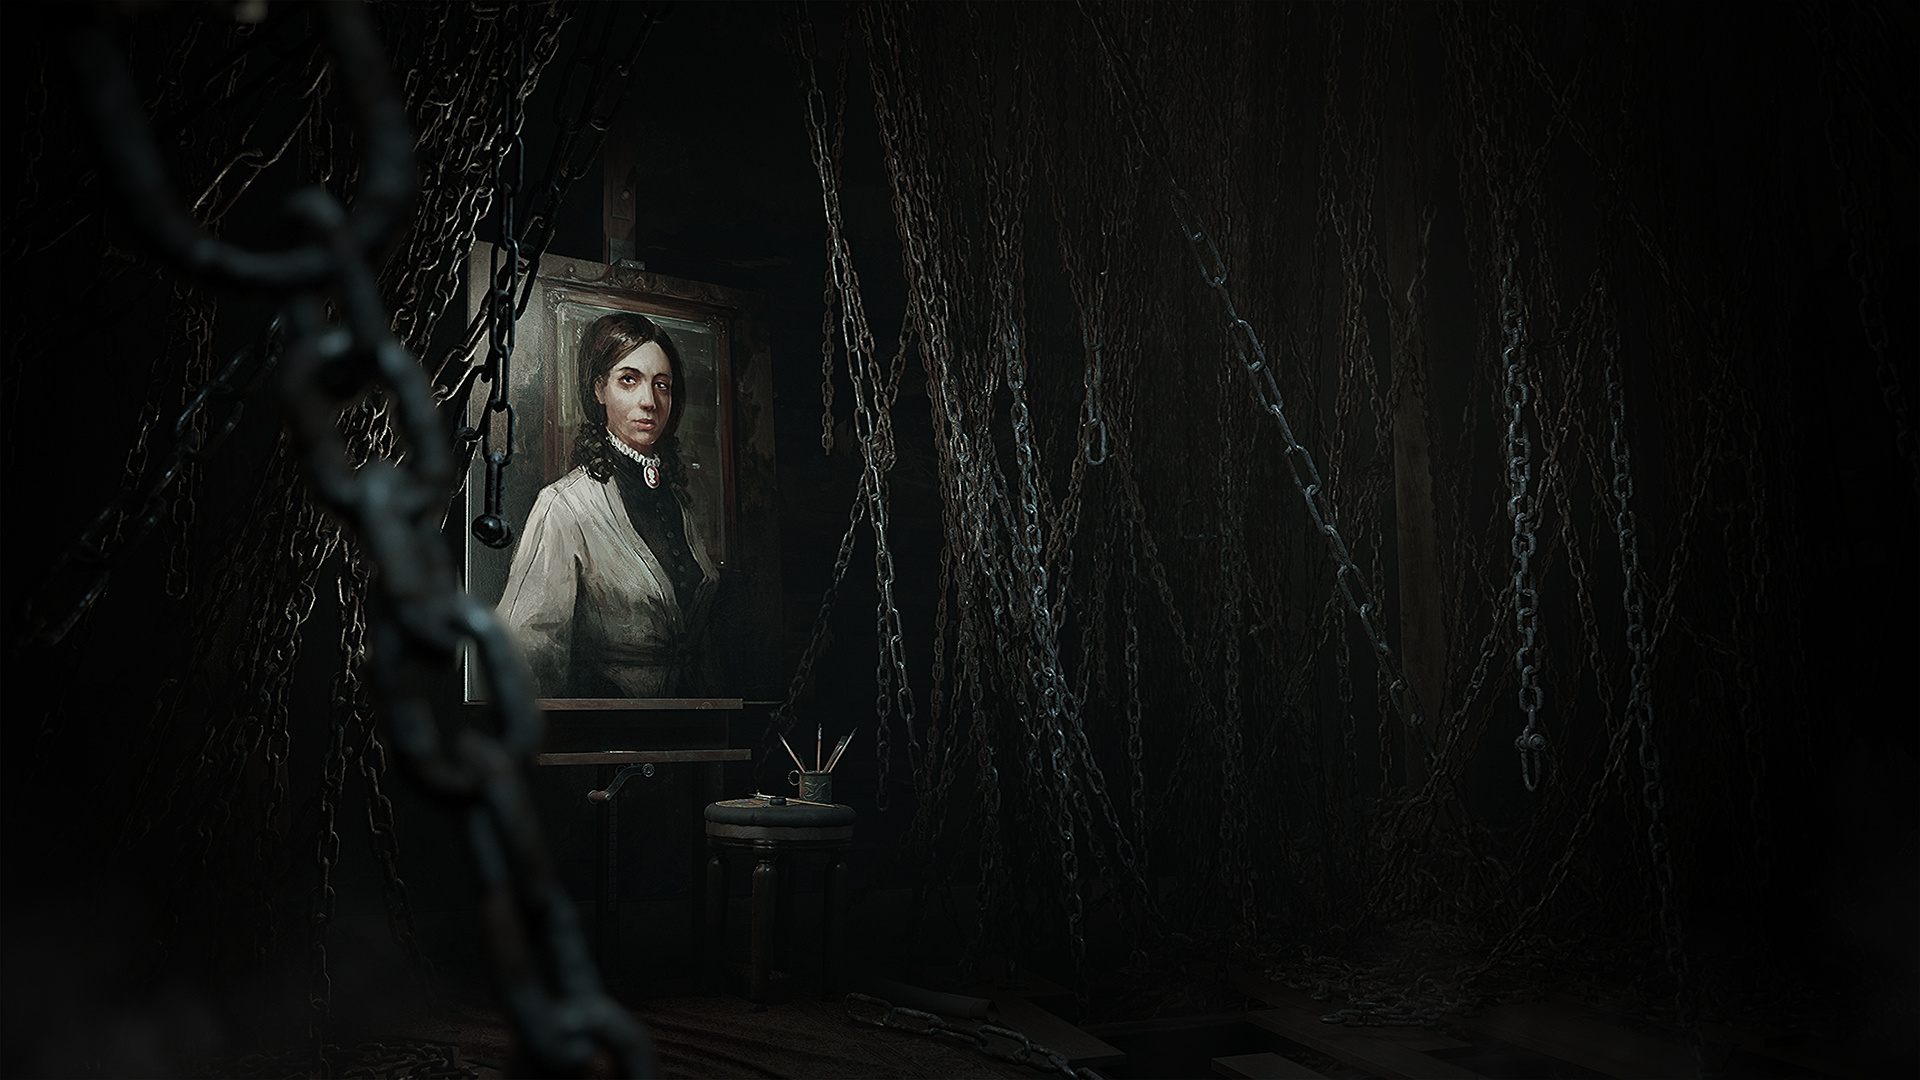 Media asset in full size related to 3dfxzone.it news item entitled as follows: Disponibile su Steam la demo di Layers of Fear che utilizza Unreal Engine 5 | Image Name: news34483_Layers-of-Fear_Screenshot_2.jpg